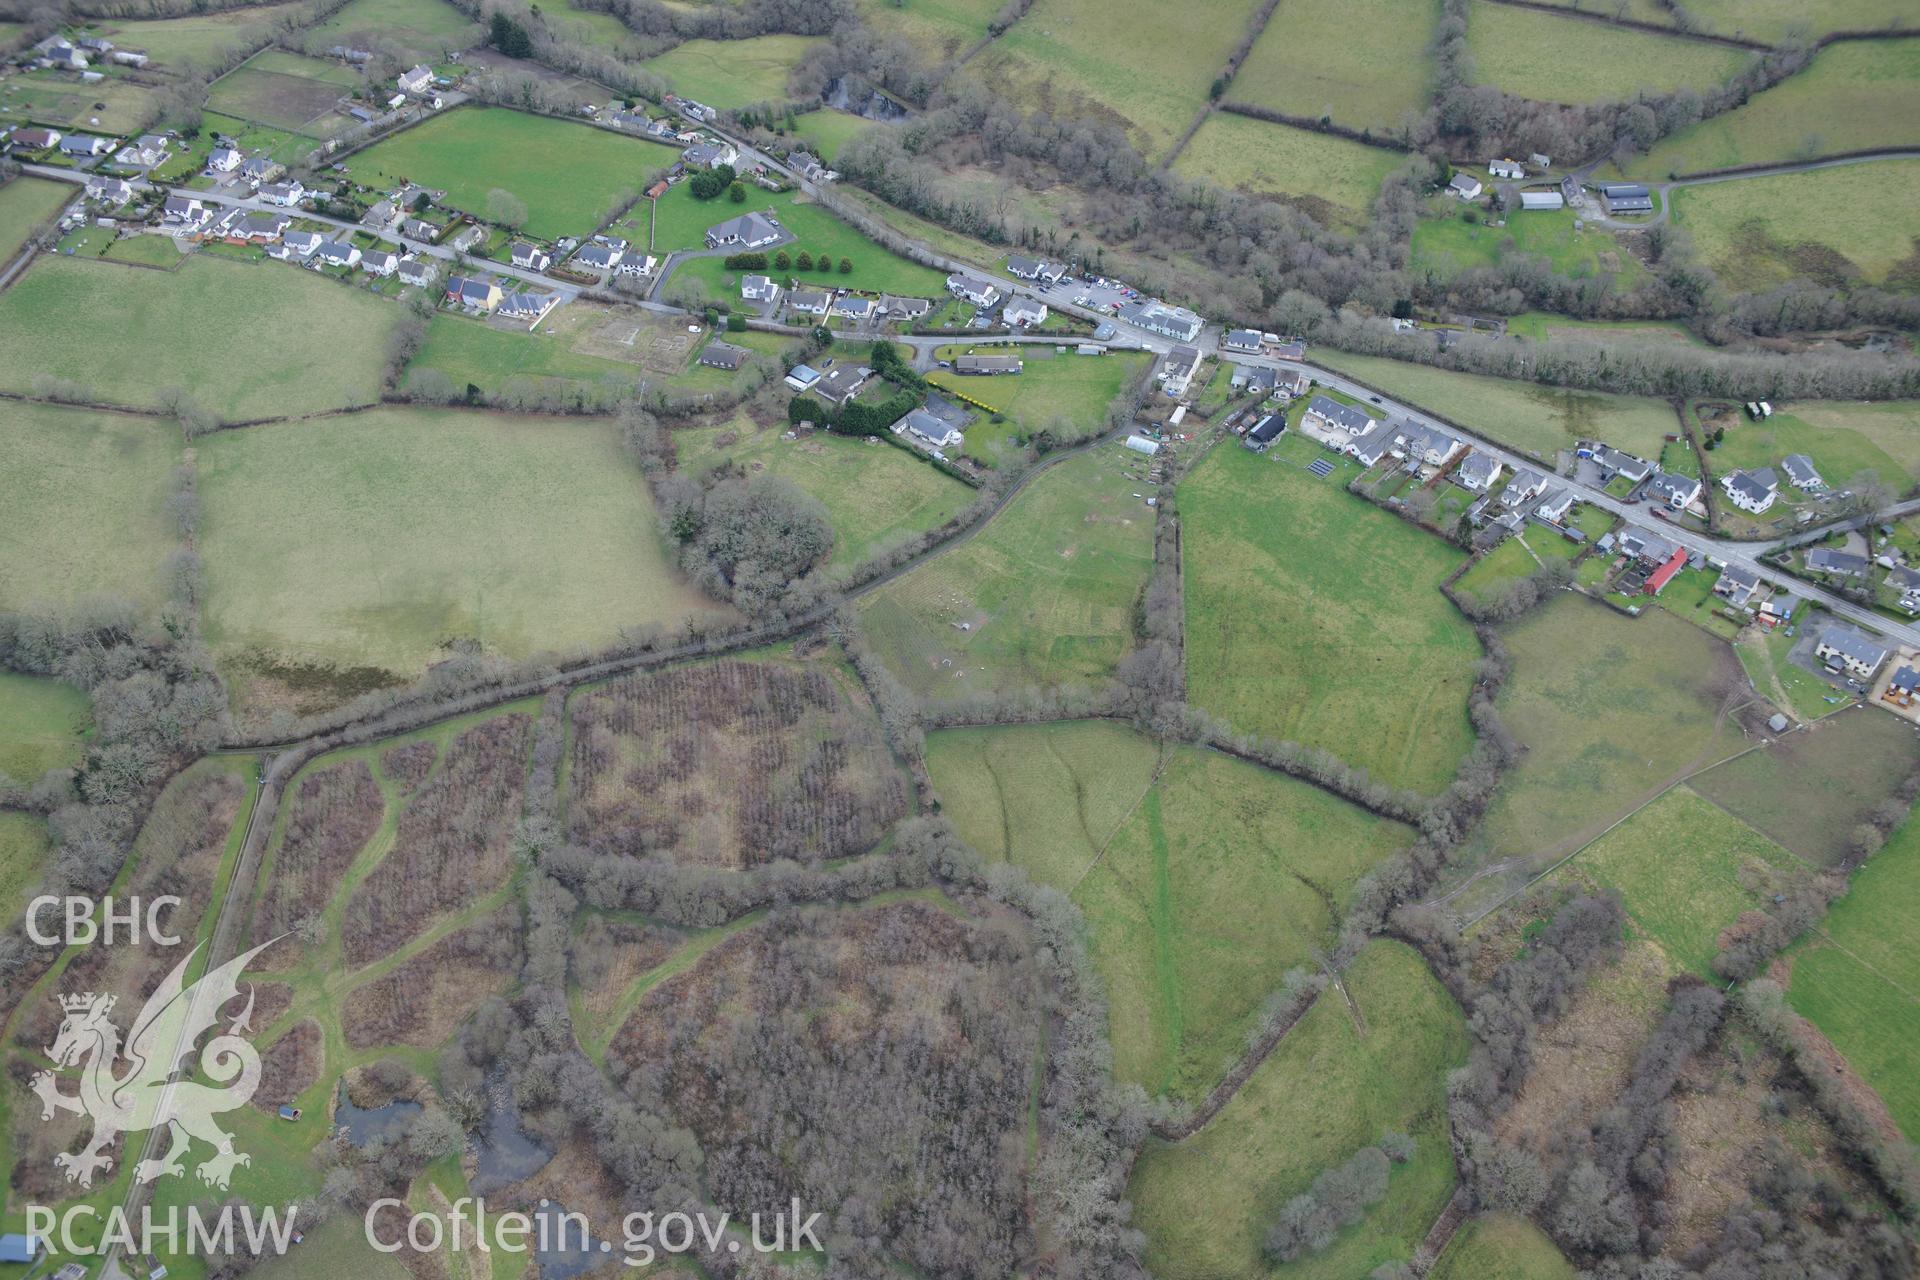 Castell Nant-y-Garan motte, Penrhiw-llan, between Newcastle Emlyn and Llandysul. Oblique aerial photograph taken during the Royal Commission's programme of archaeological aerial reconnaissance by Toby Driver on 13th March 2015.